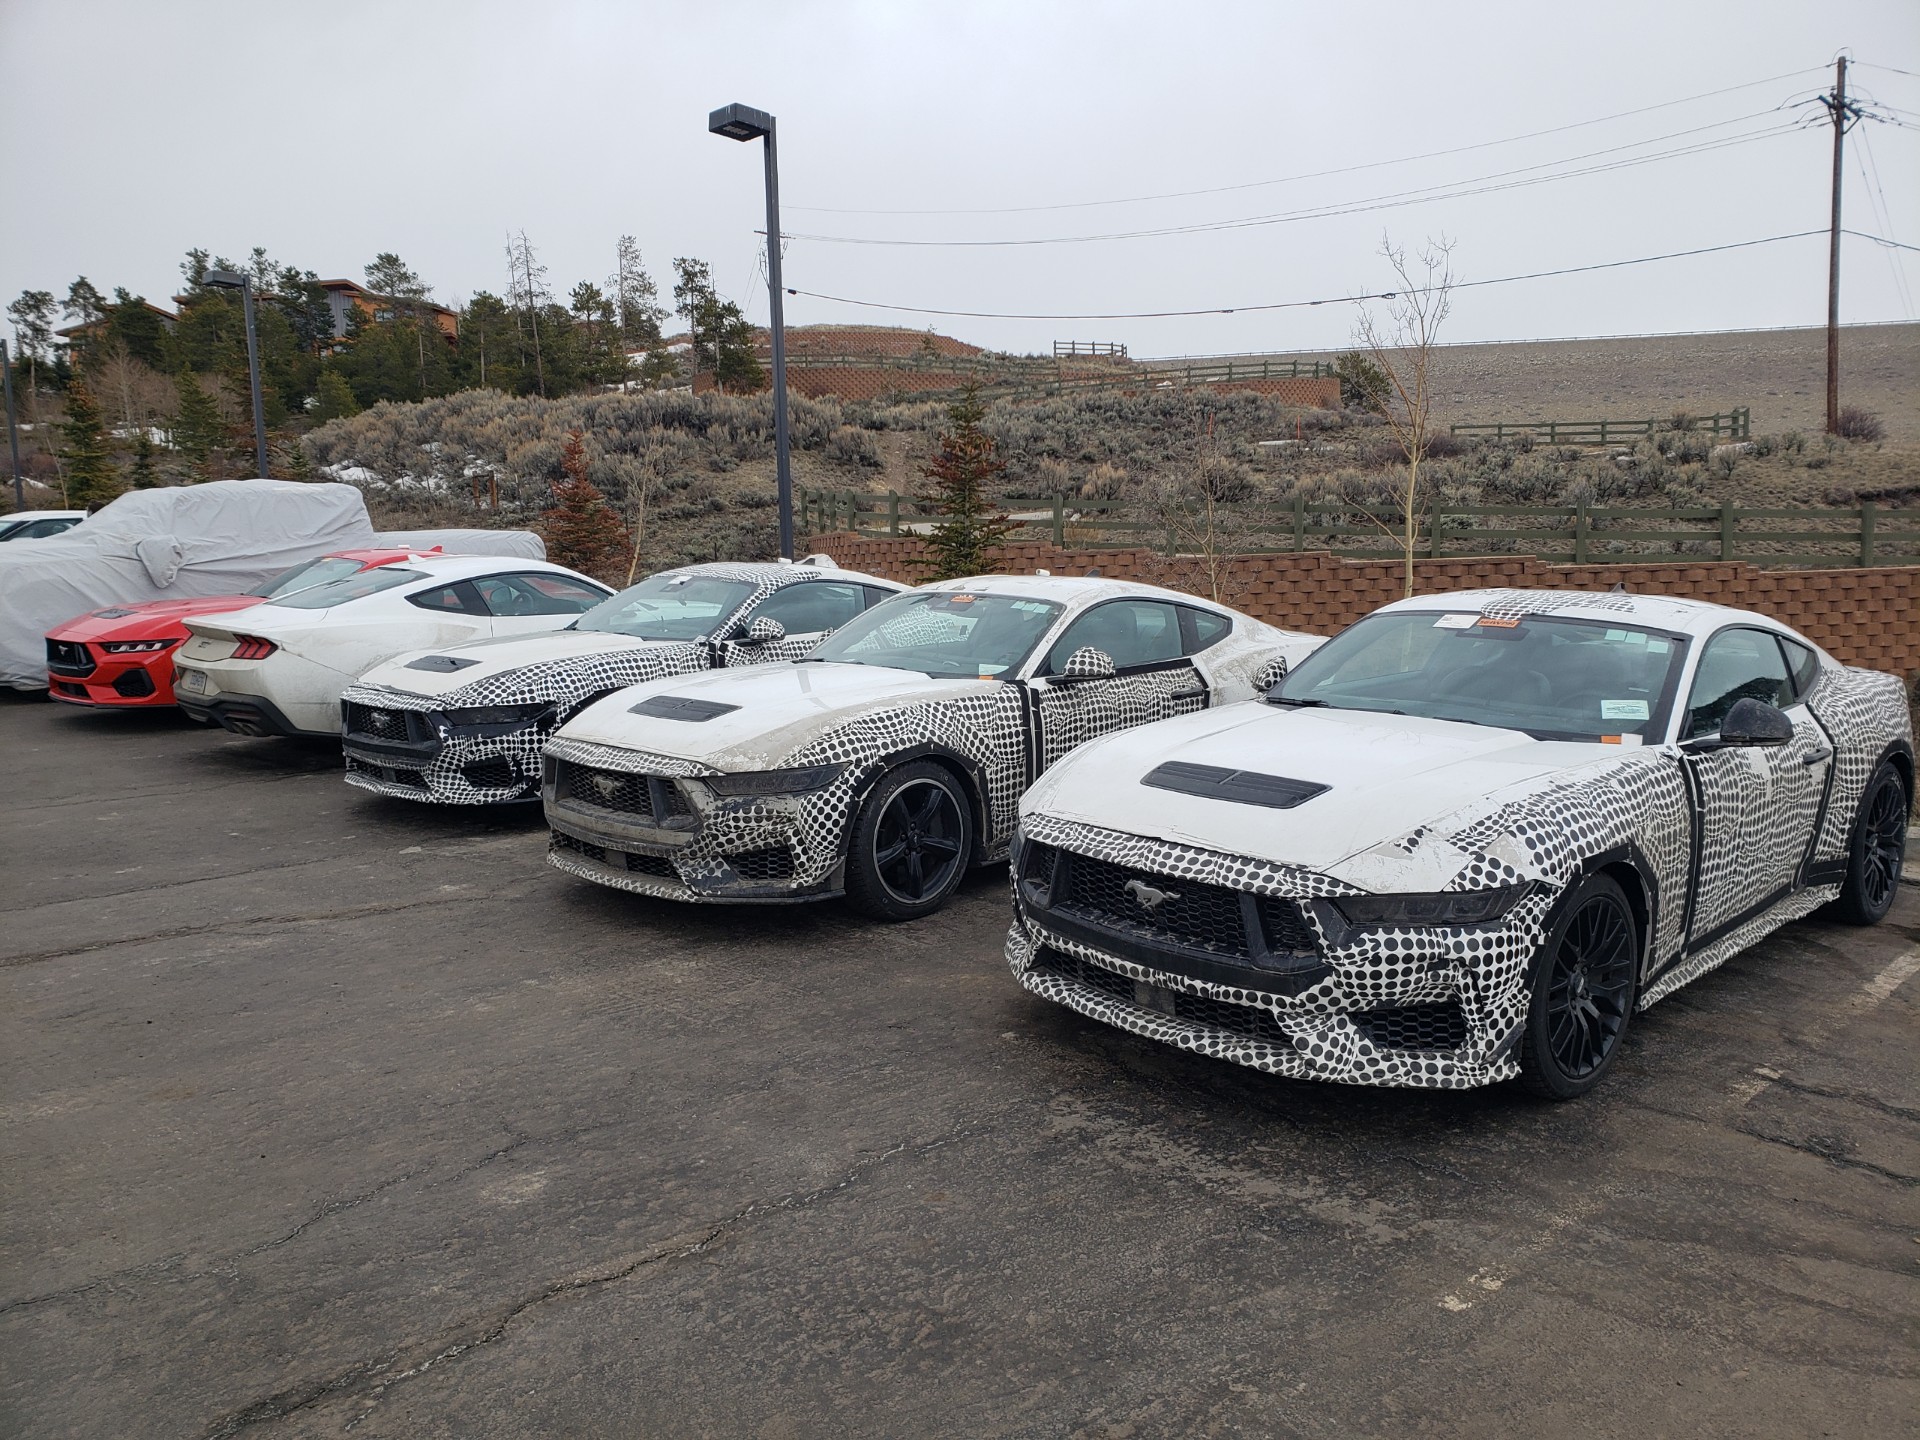 S650 Mustang S650 Mustang global-market prototypes testing in Colorado S650 Camo 1